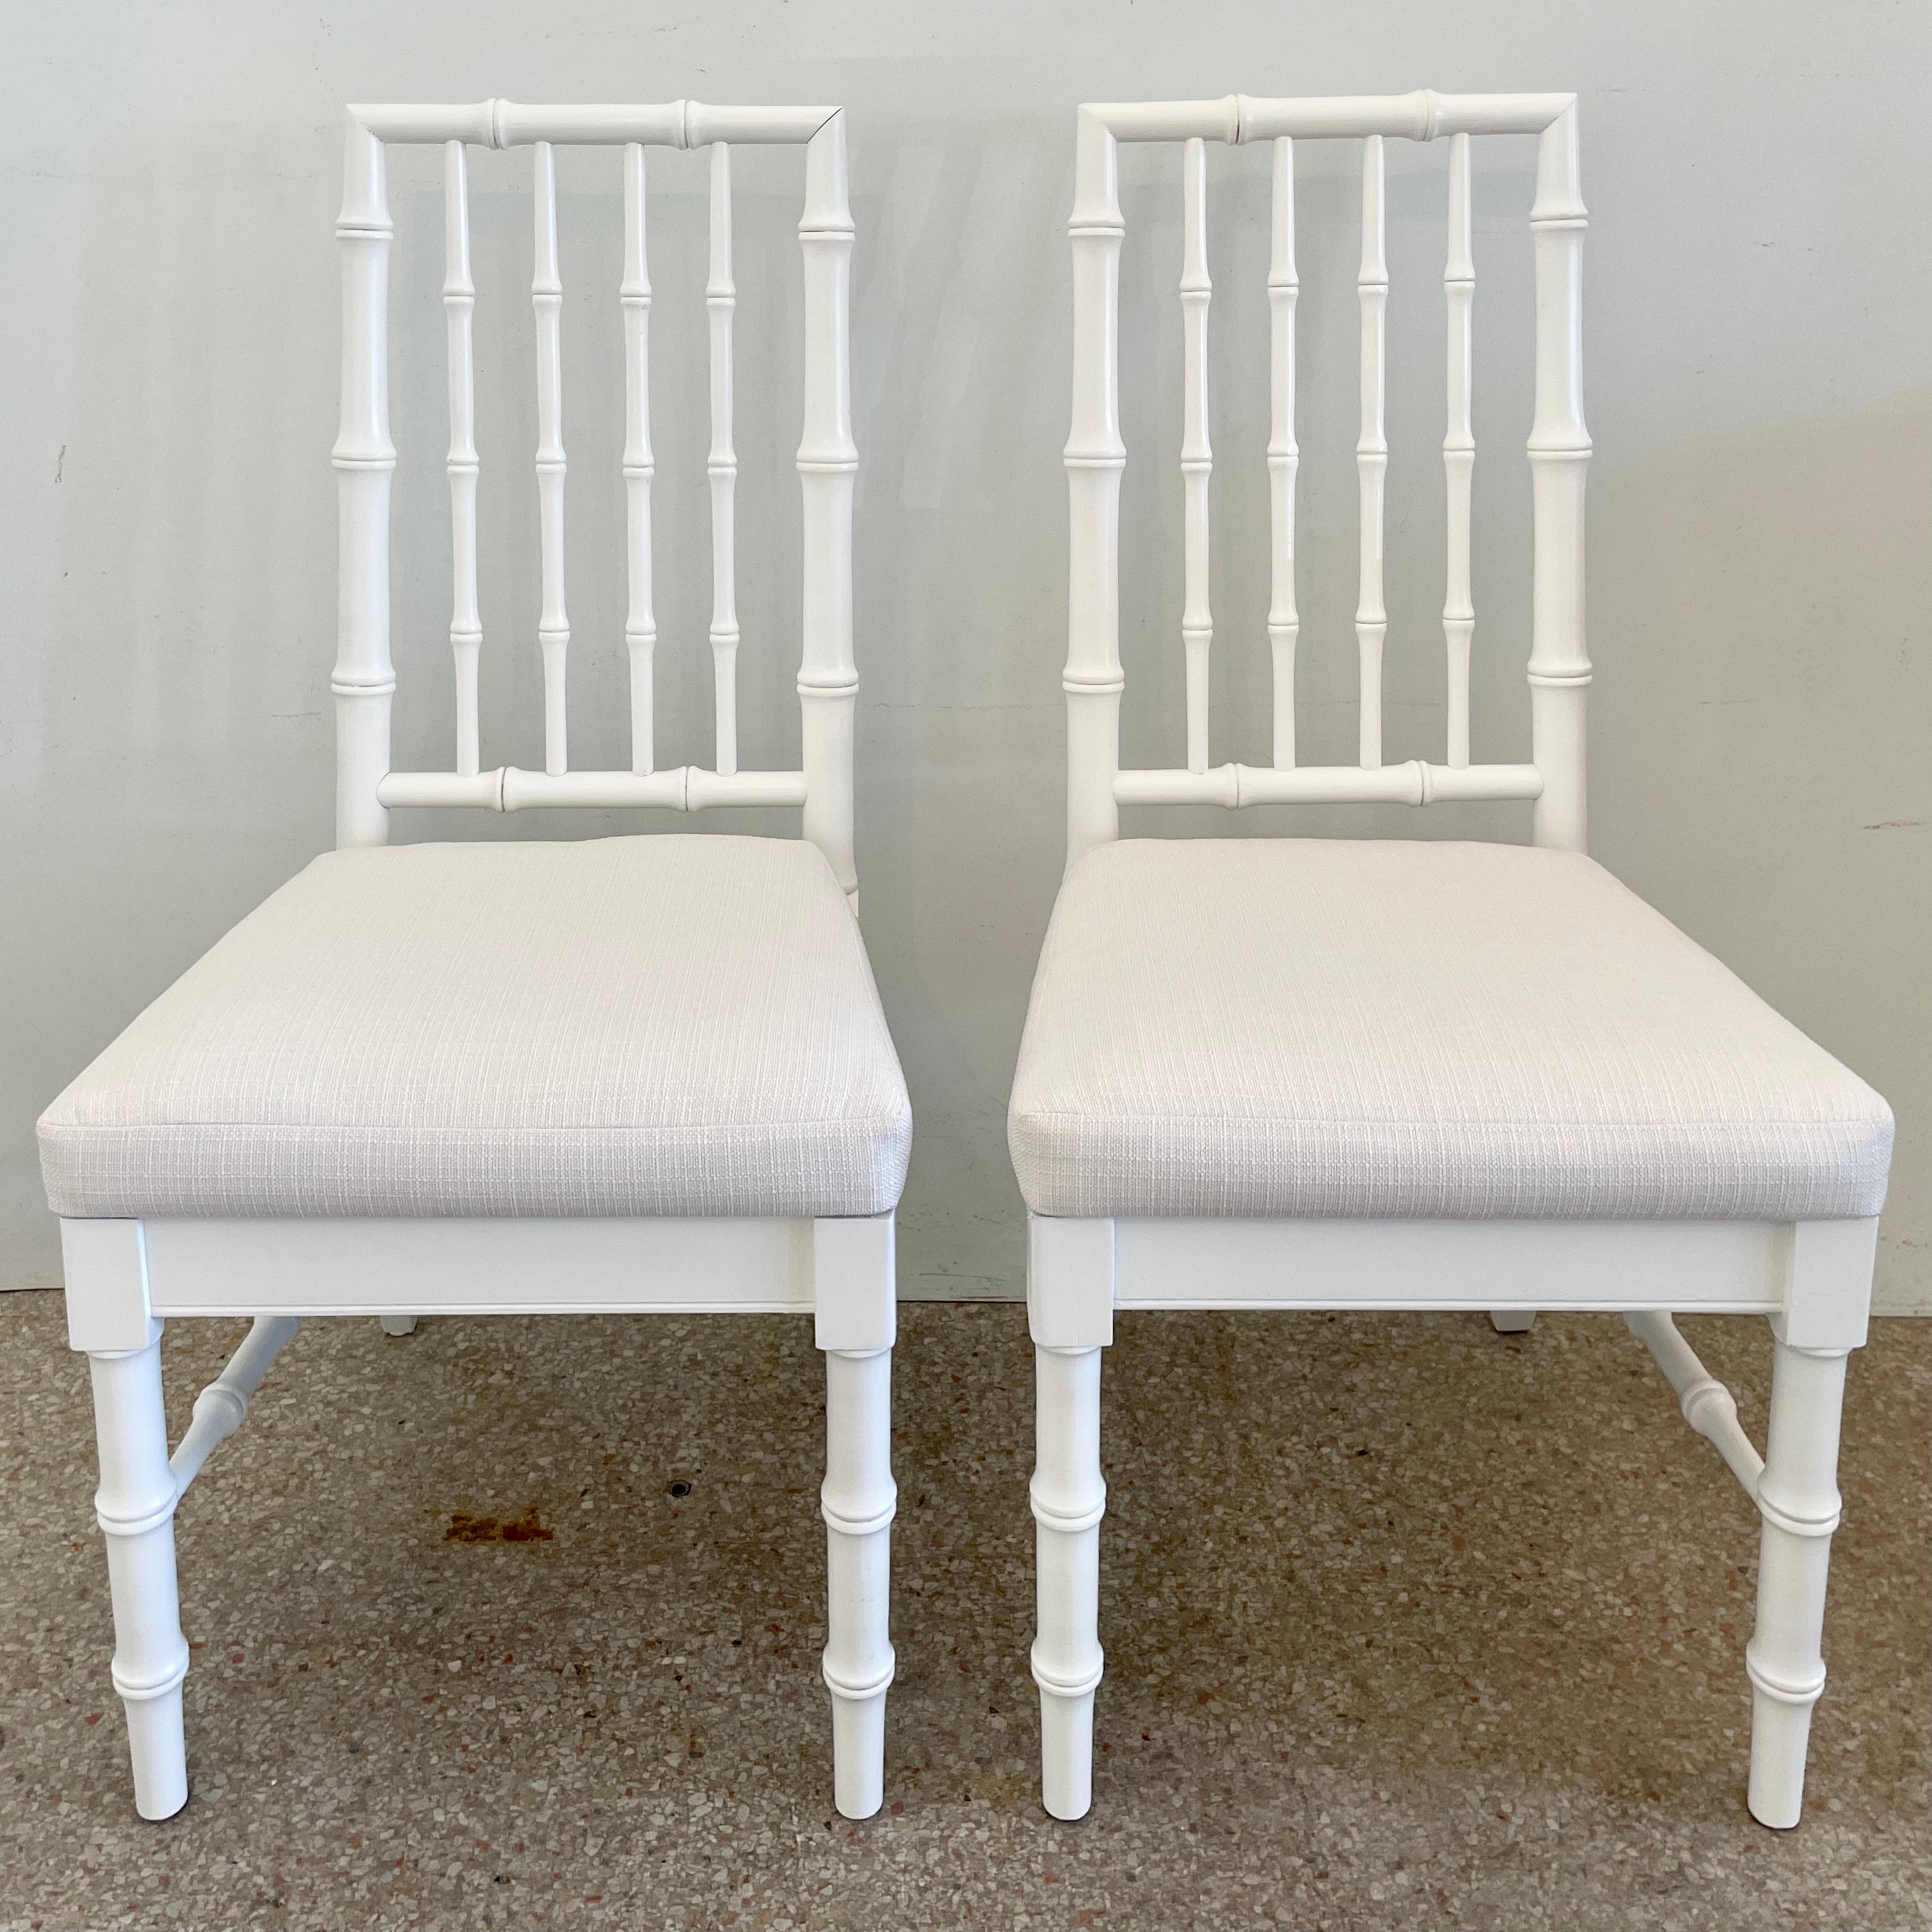 Faux Bamboo Dining Chairs in White Lacquer and Todd Hase Textiles, Set of 4 In Good Condition For Sale In Los Angeles, CA